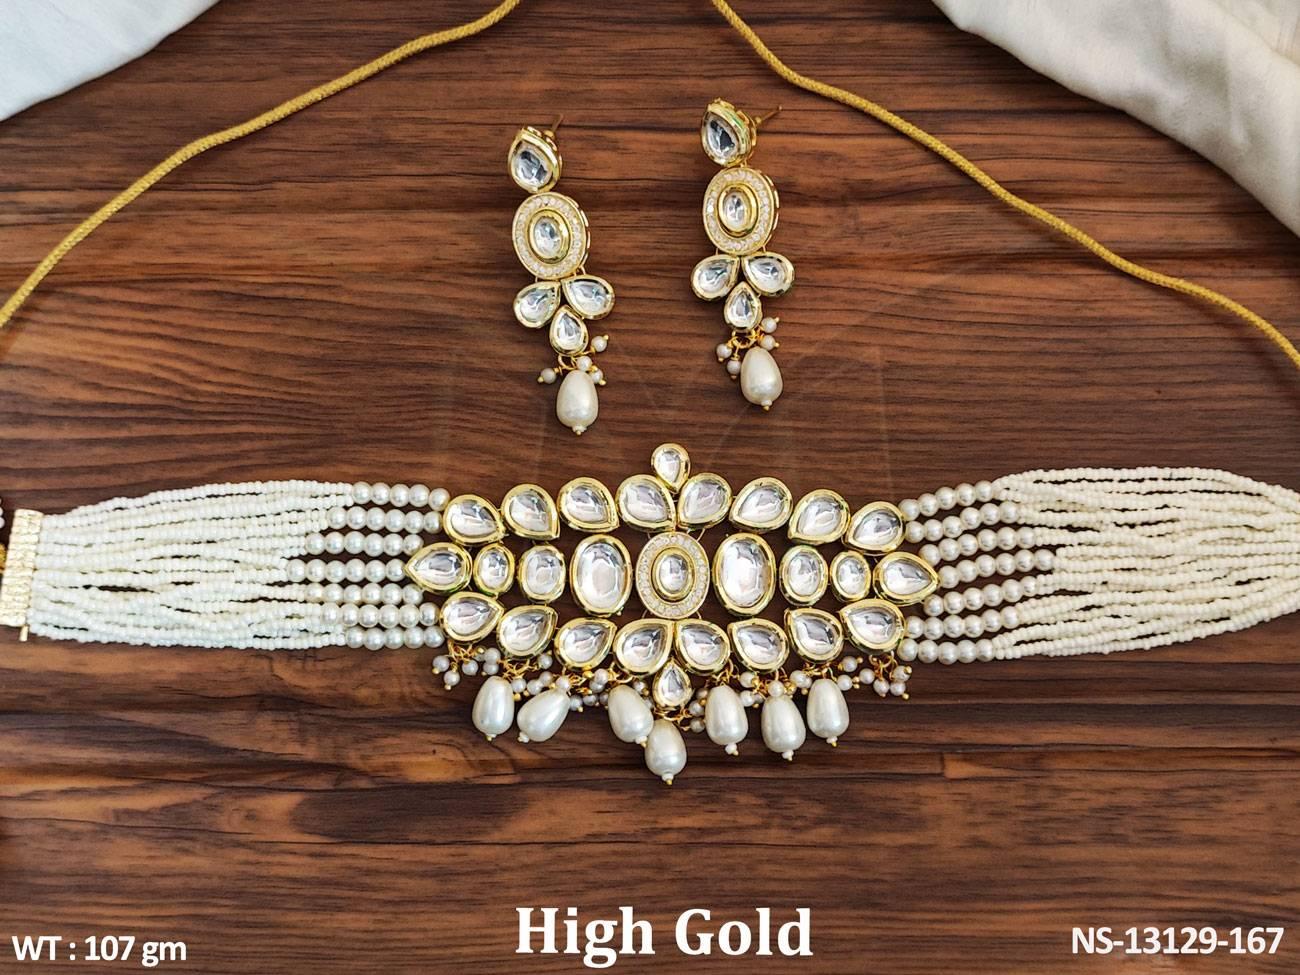 This Designer Party wear Kundan Choker Necklace Set features exquisite Kundan stones and a high gold polish,